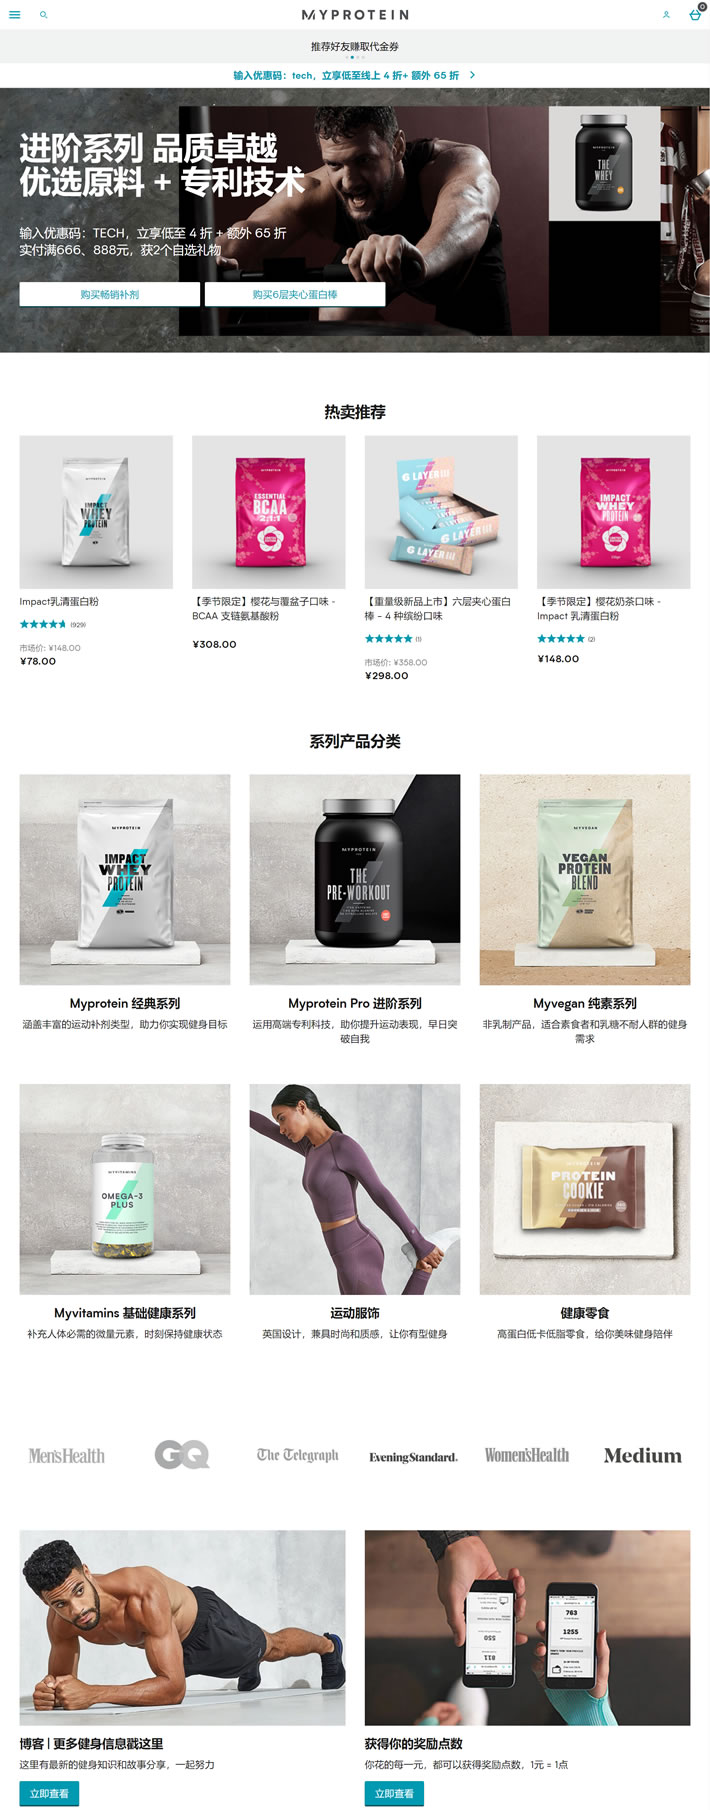 Myprotein China Official Site: Europe’s No1 Sports Nutrition Brand